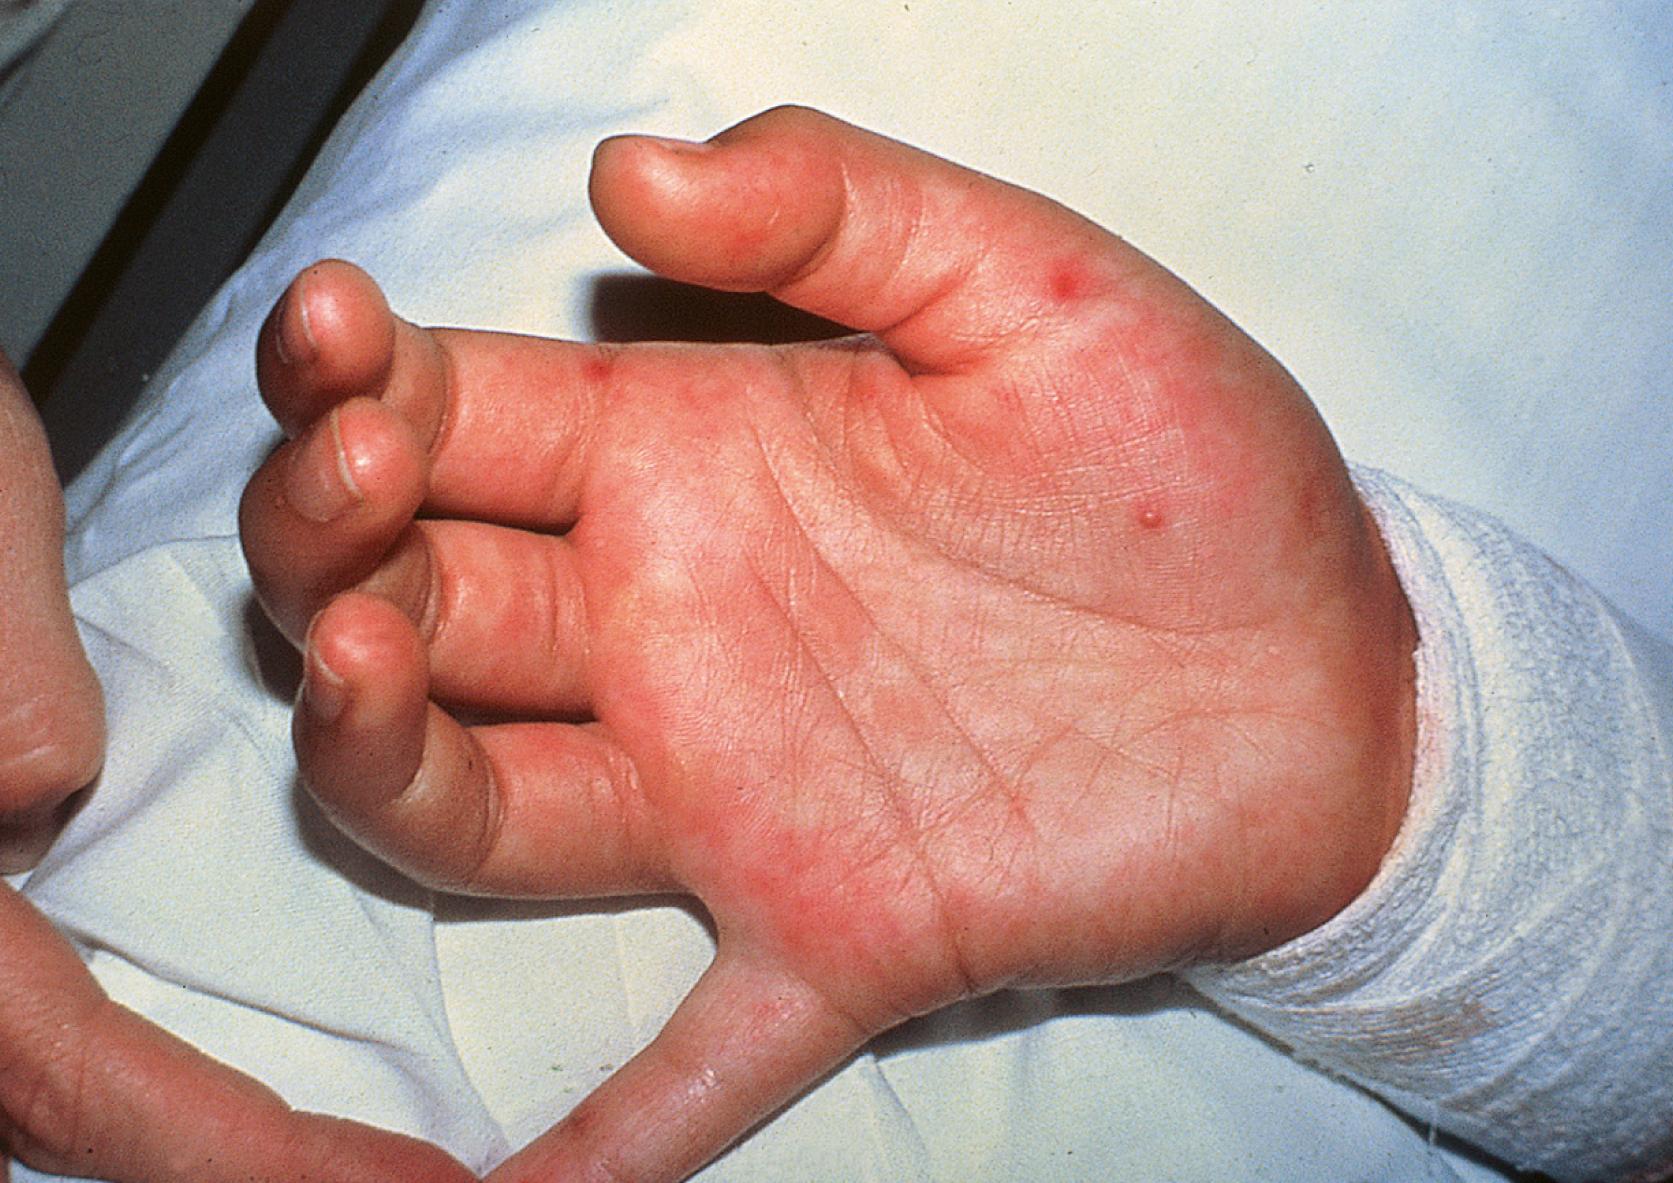 FIGURE 236.1, Typical hand lesions of Coxsackie A virus in an infant with a febrile illness. No other exanthem was present.